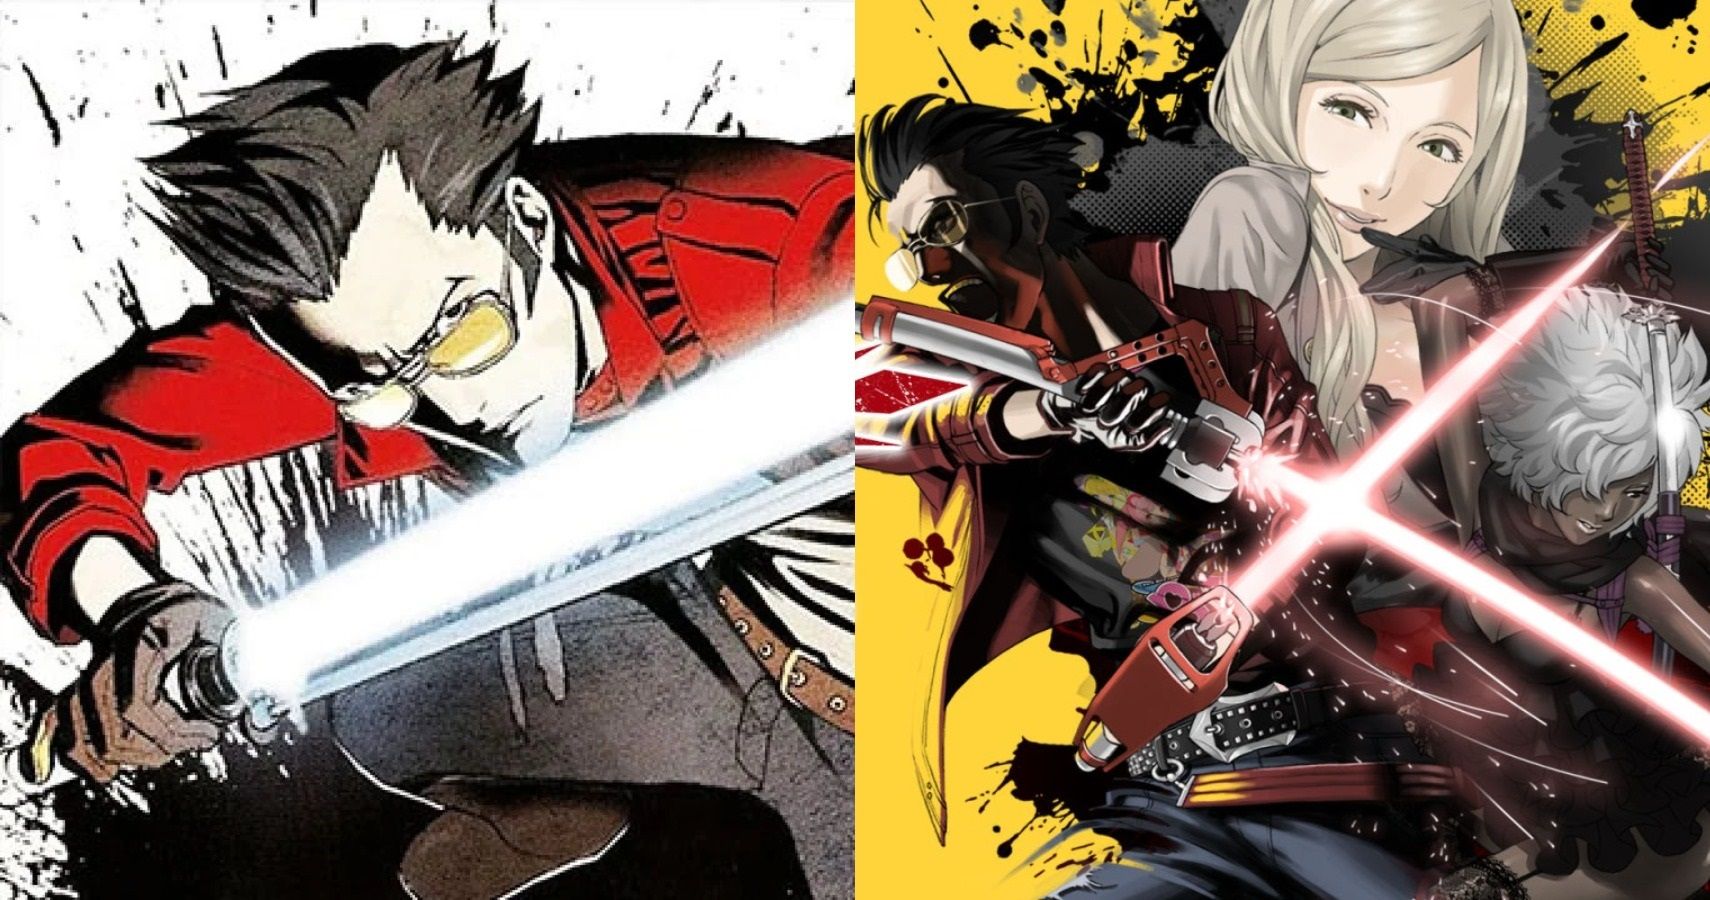 No More Heroes 1 & 2: Desperate Struggle appear rated for PC